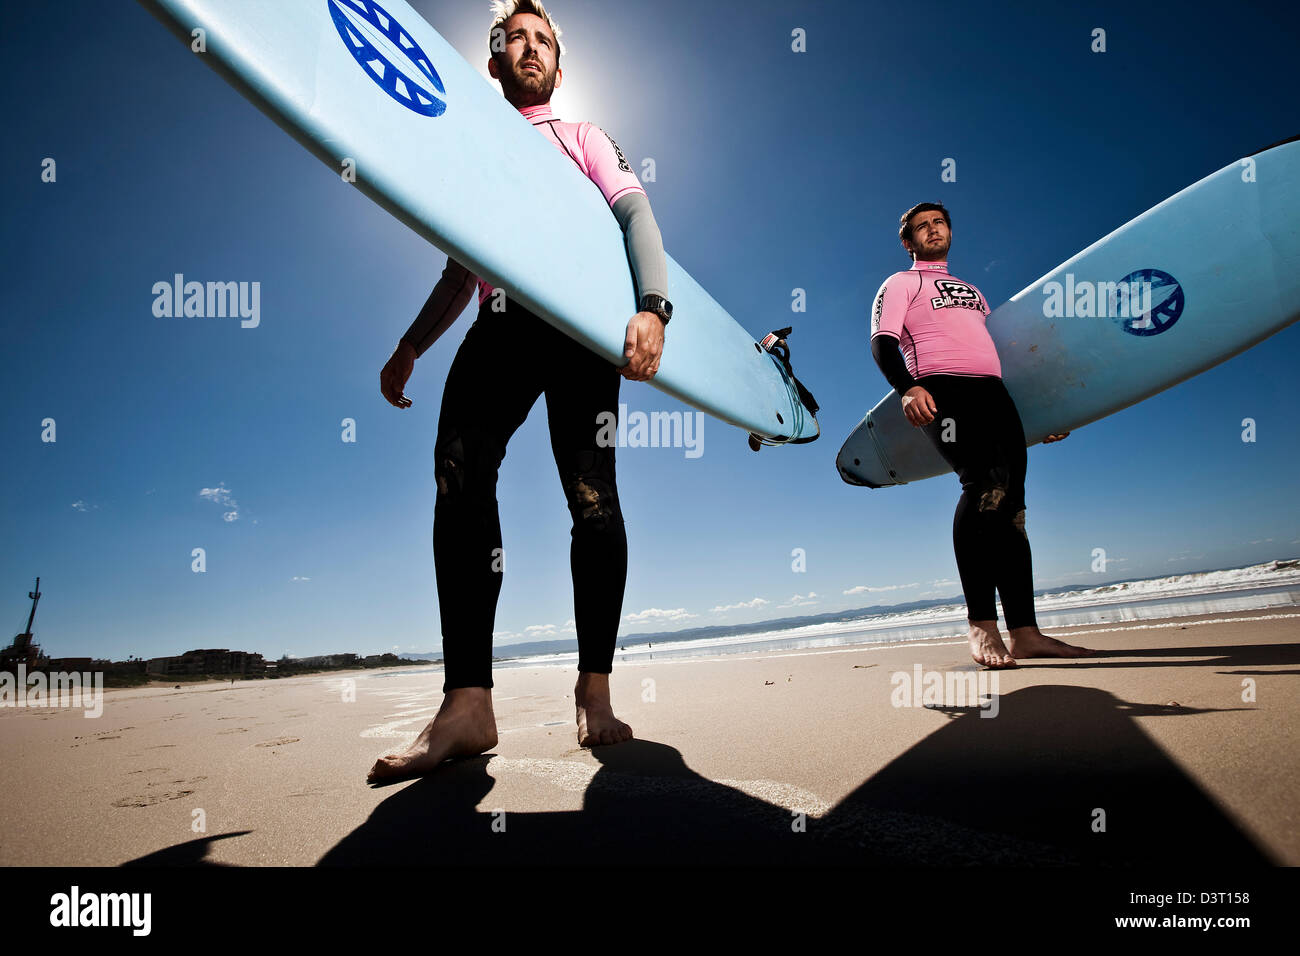 Surfers standing with boards, Jeffreys Bay, Indian Ocean, South Africa Stock Photo